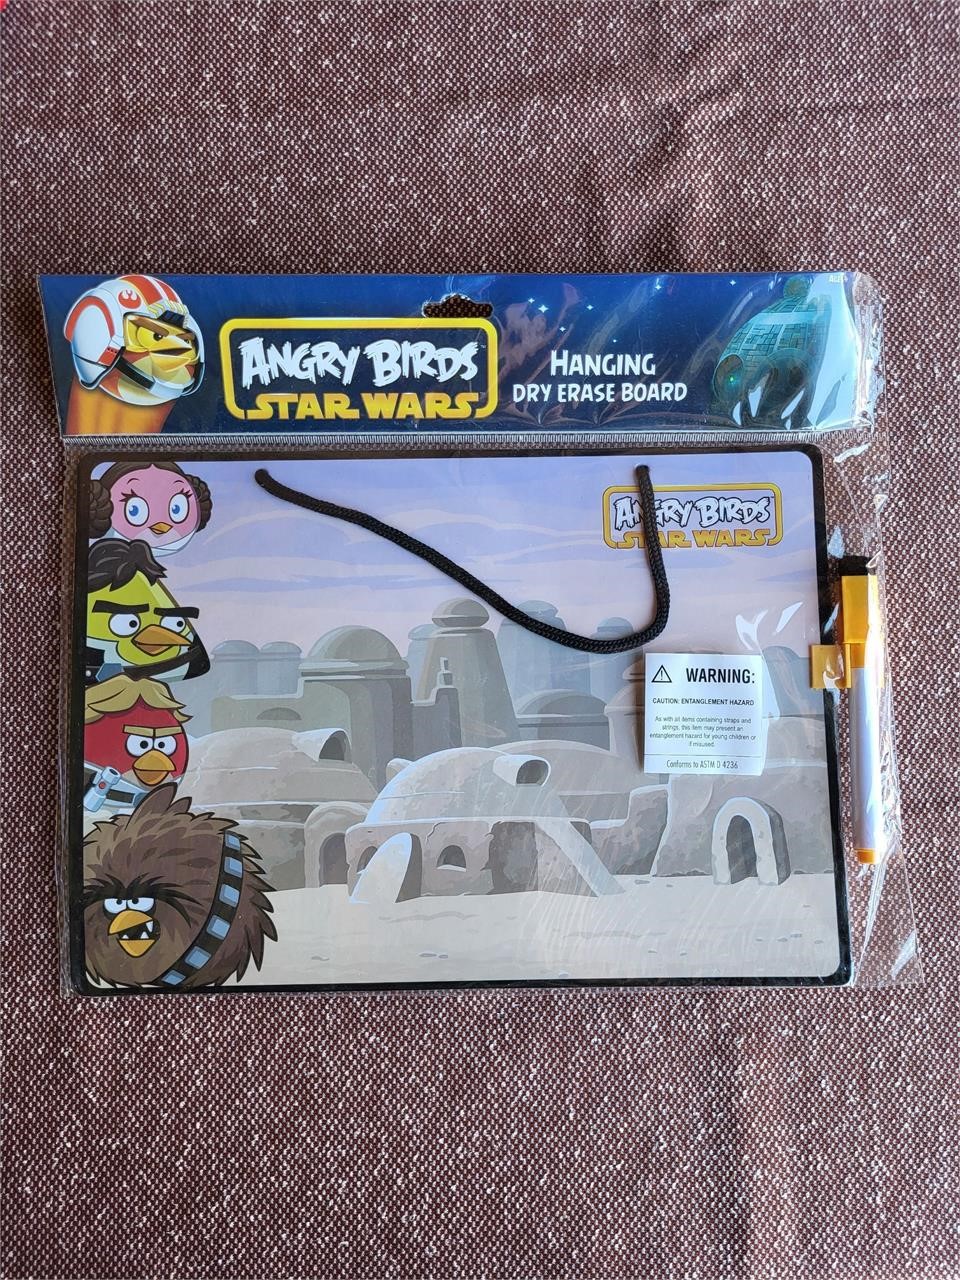 Star Wars Angry Birds Dry Erase Board